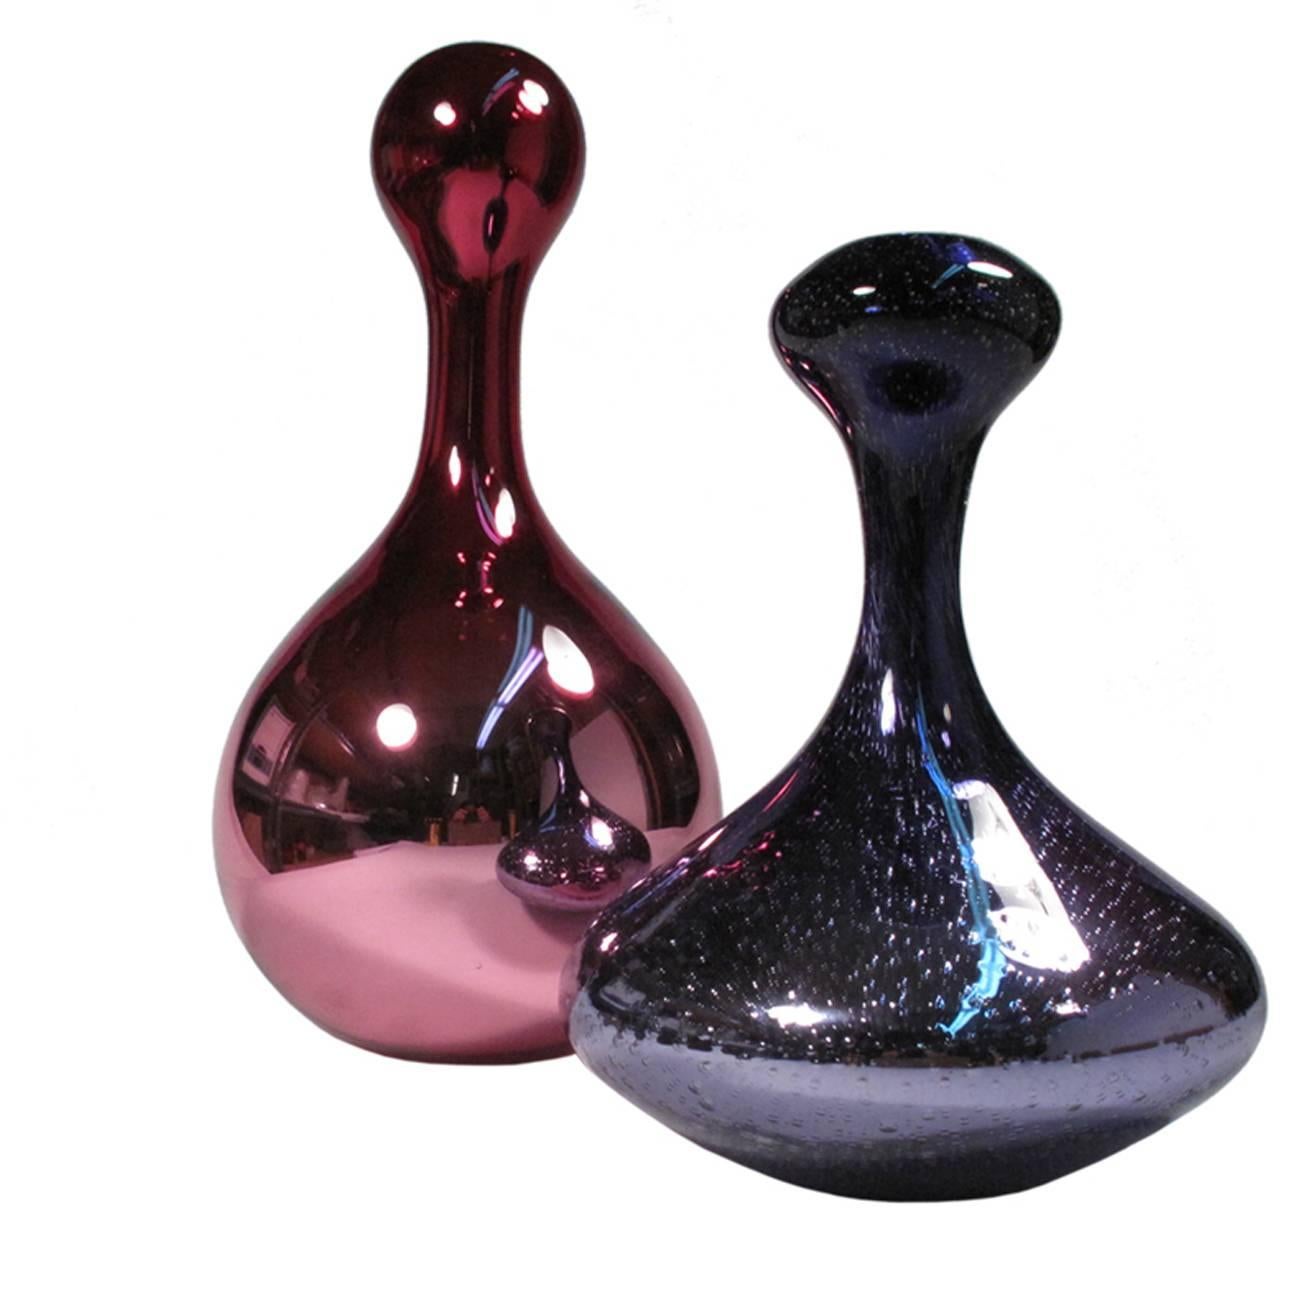 An amethyst colored metallic mouth-blown glass vase by a NYC artist. The vase is made using a double-walled process. The vase has a bubbled exterior and an opening at the top. Signed and dated by the artist.